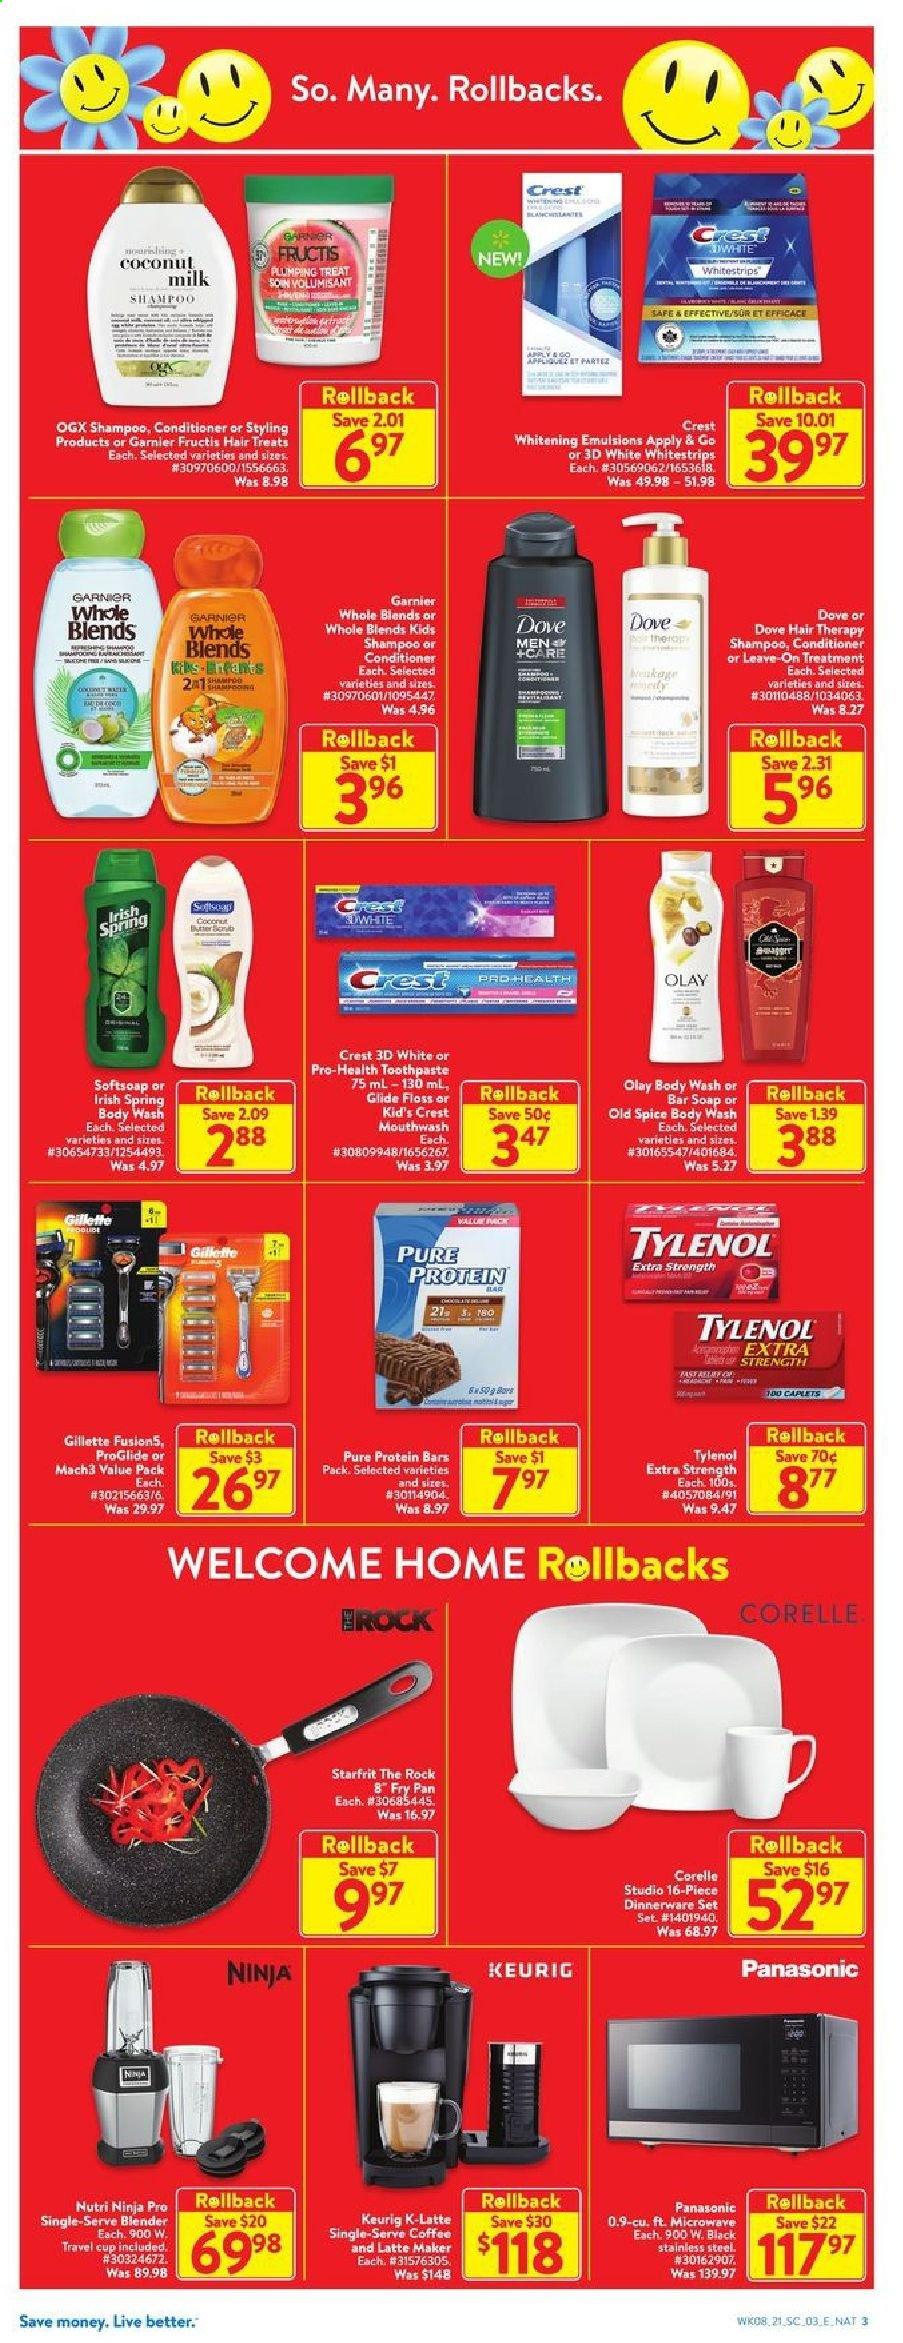 thumbnail - Walmart Flyer - March 18, 2021 - March 24, 2021 - Sales products - coconut milk, protein bar, spice, coffee, Keurig, body wash, Softsoap, soap bar, soap, toothpaste, mouthwash, Crest, Olay, OGX, conditioner, Fructis, dinnerware set, pan, cup, microwave, Tylenol, Garnier, Gillette, shampoo, Panasonic, Old Spice. Page 3.